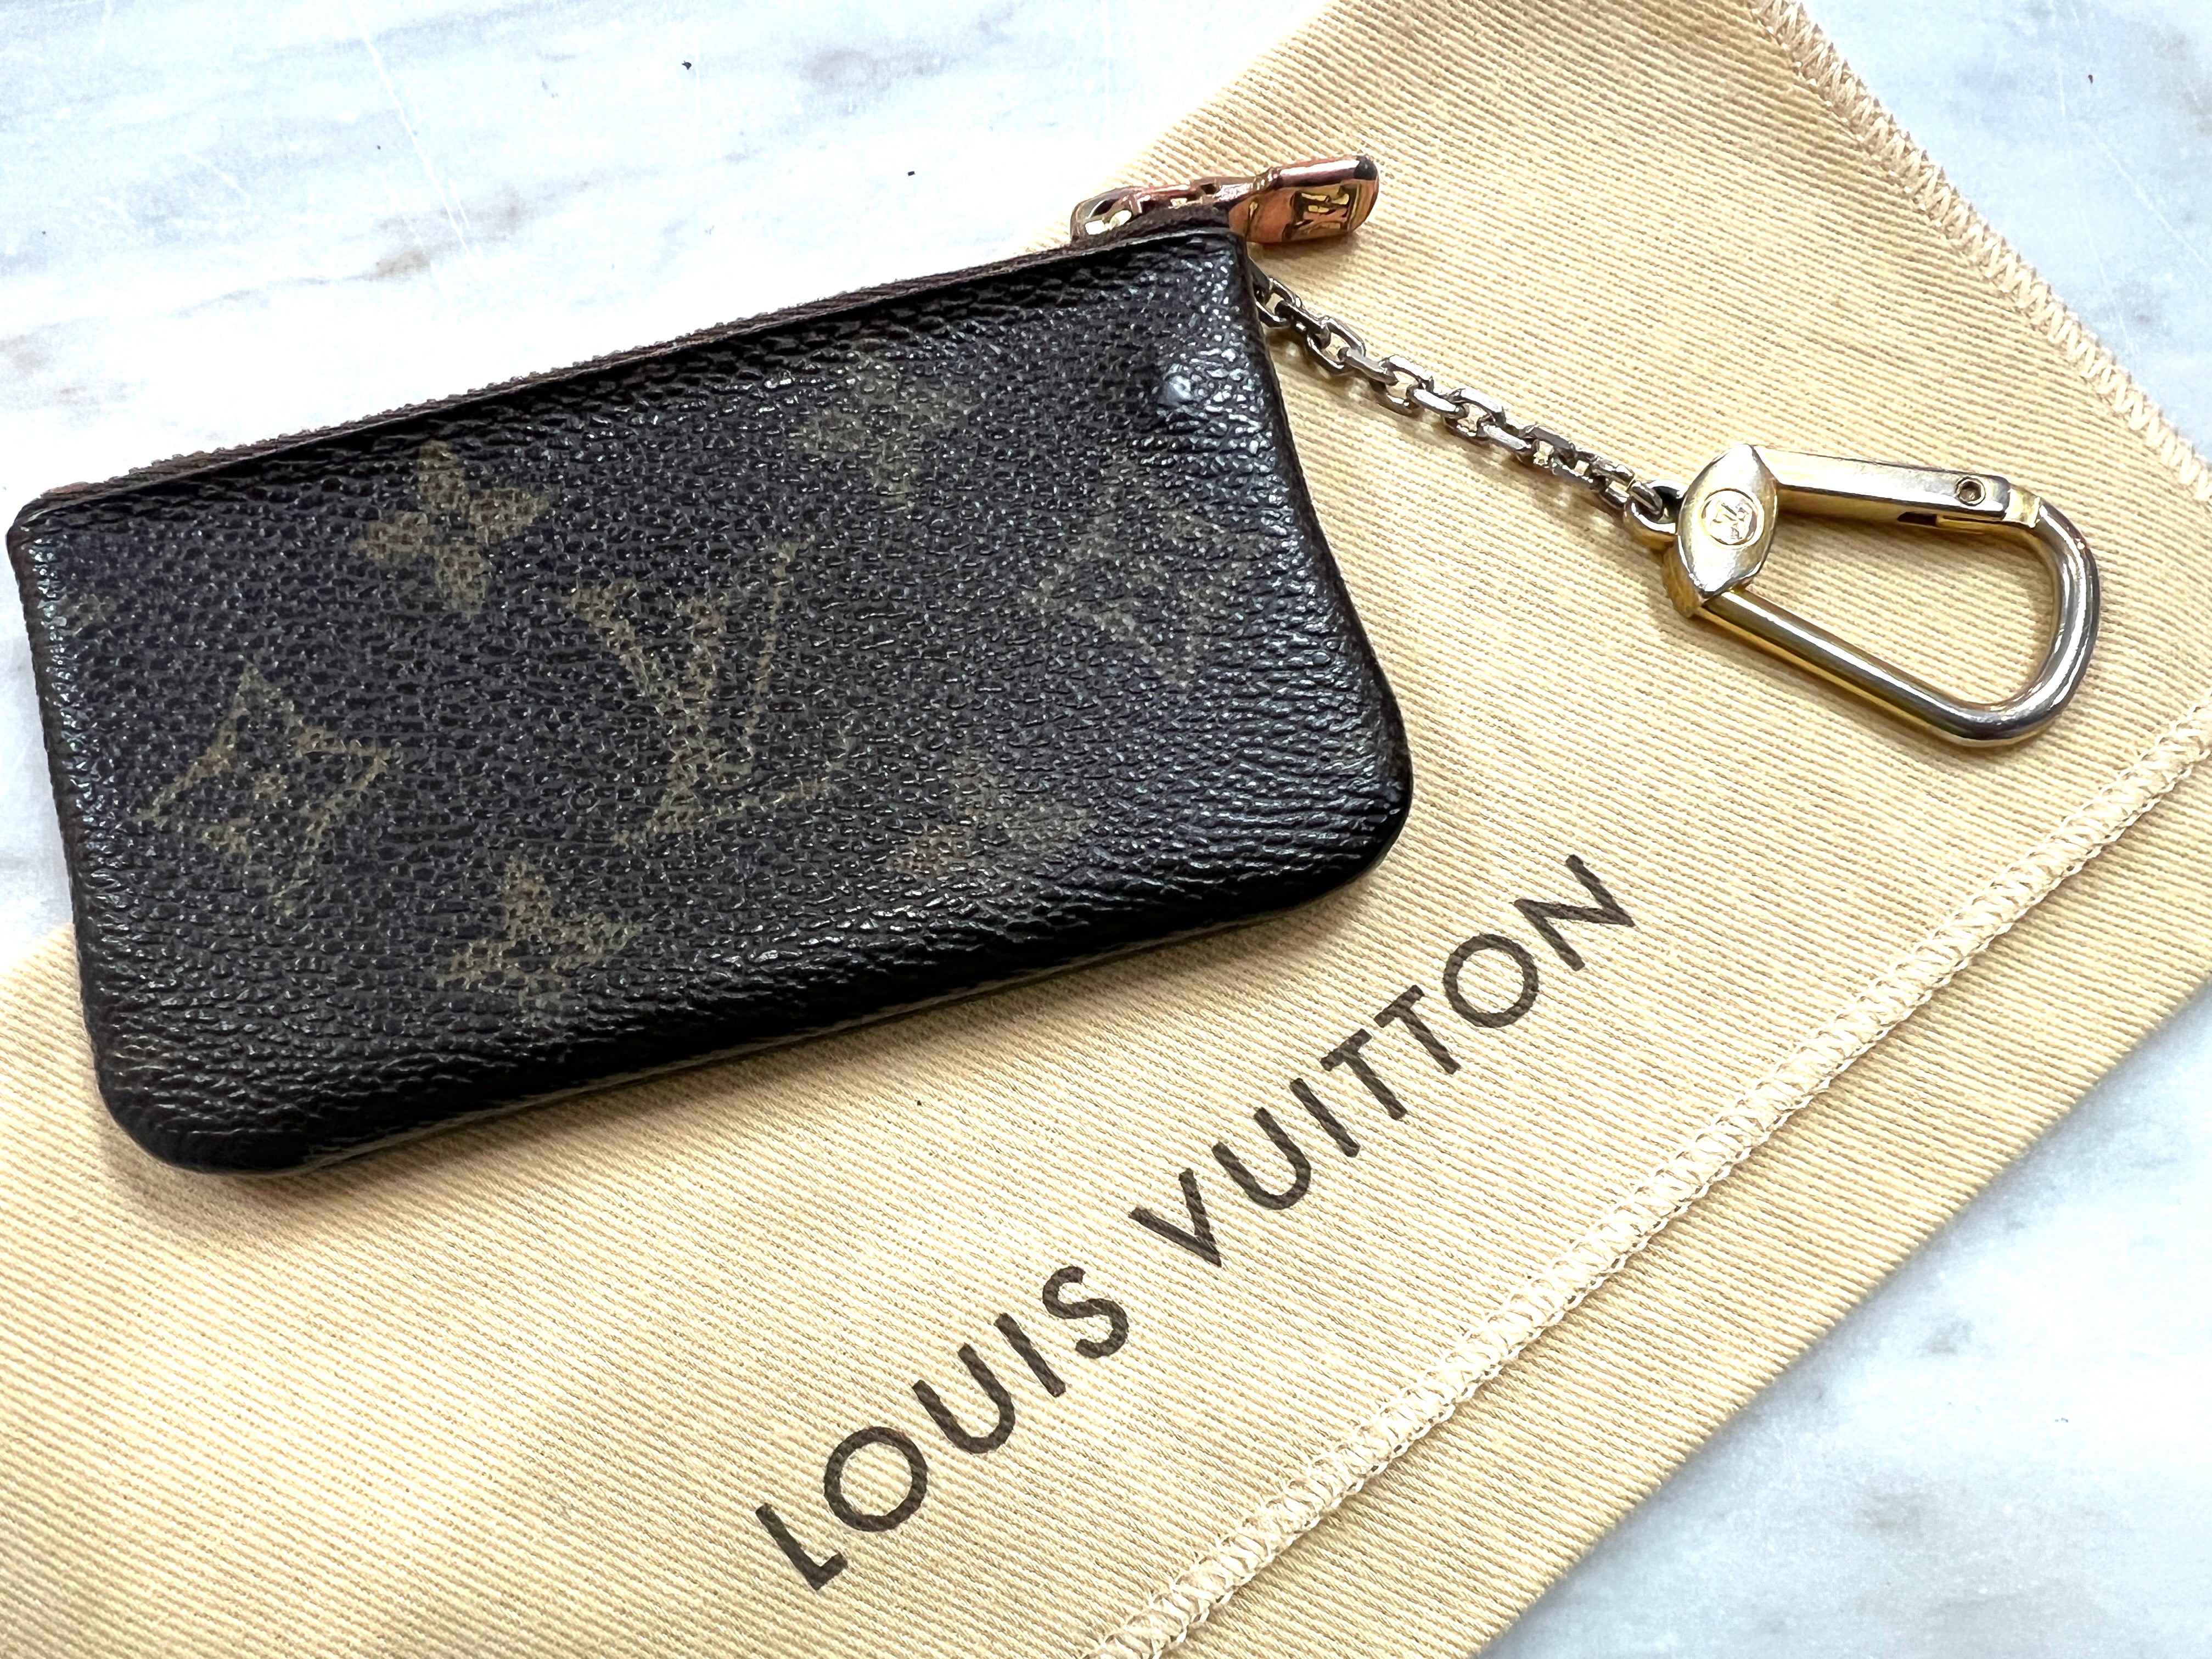 *BRAND NEW - AUTHENTIC* LOUIS VUITTON Key Pouch Cles Monogram NWT Perfect  Gift